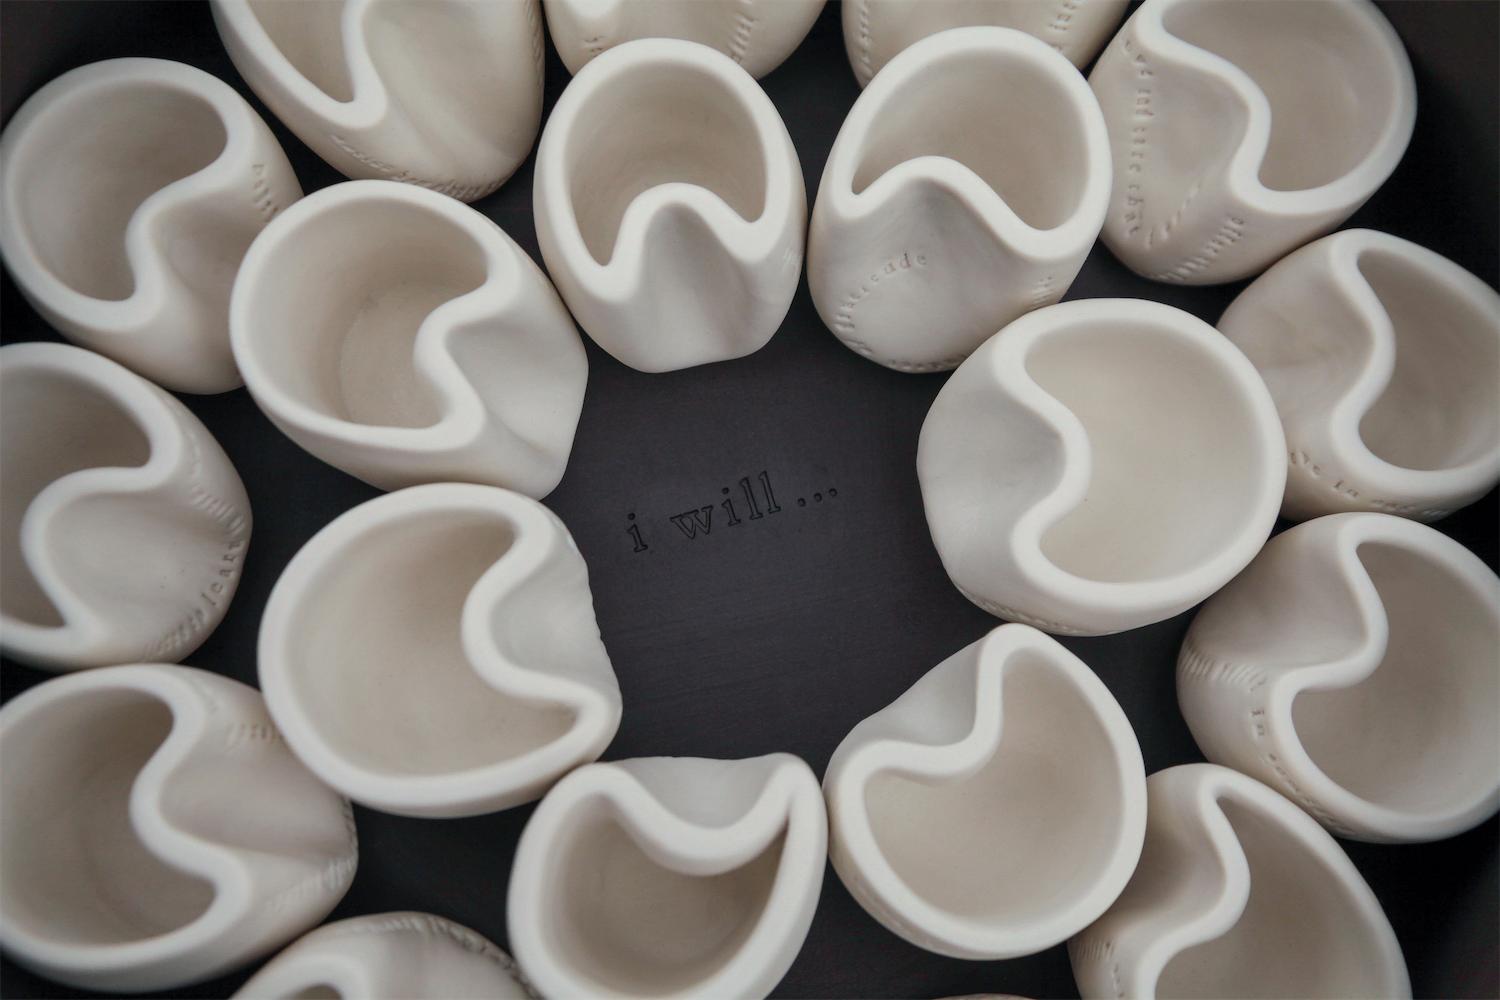 High angle image of twenty white porcelain cups in black porcelain carrier.  The cups are centered around the statement “I will…” that is stamped onto the center of the carrier.